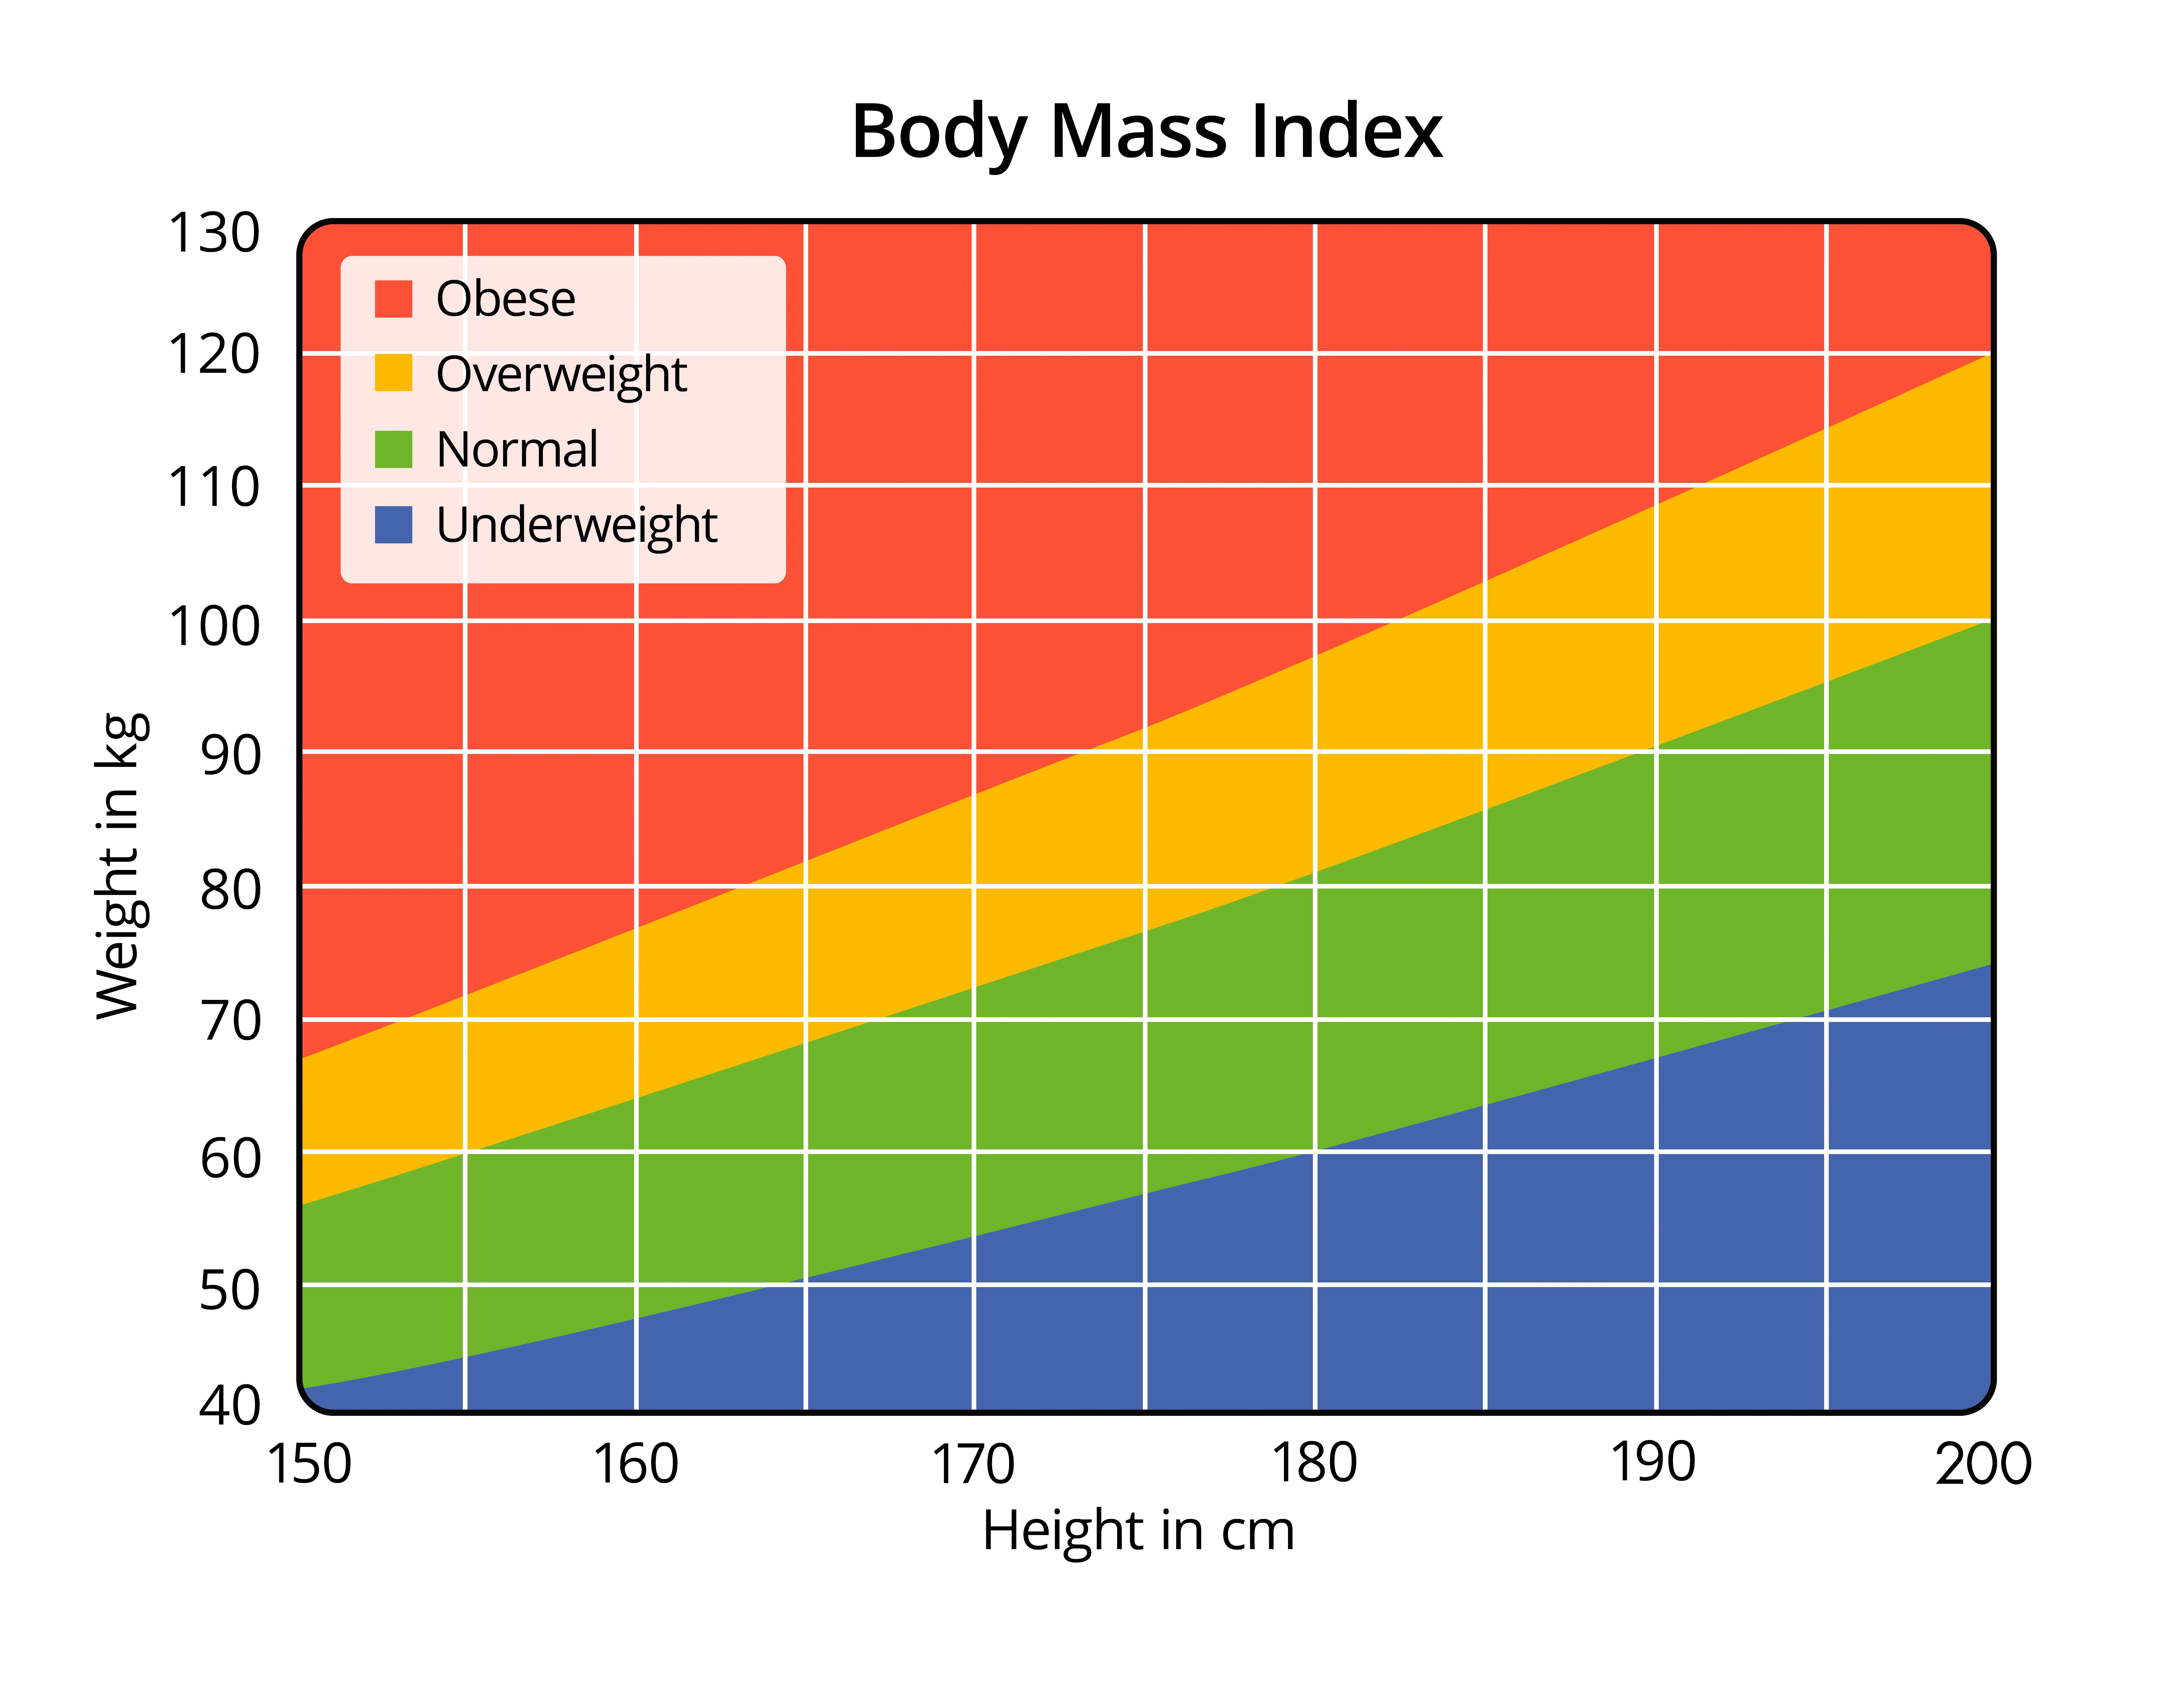 The importance of knowing your Body Mass Index (BMI)